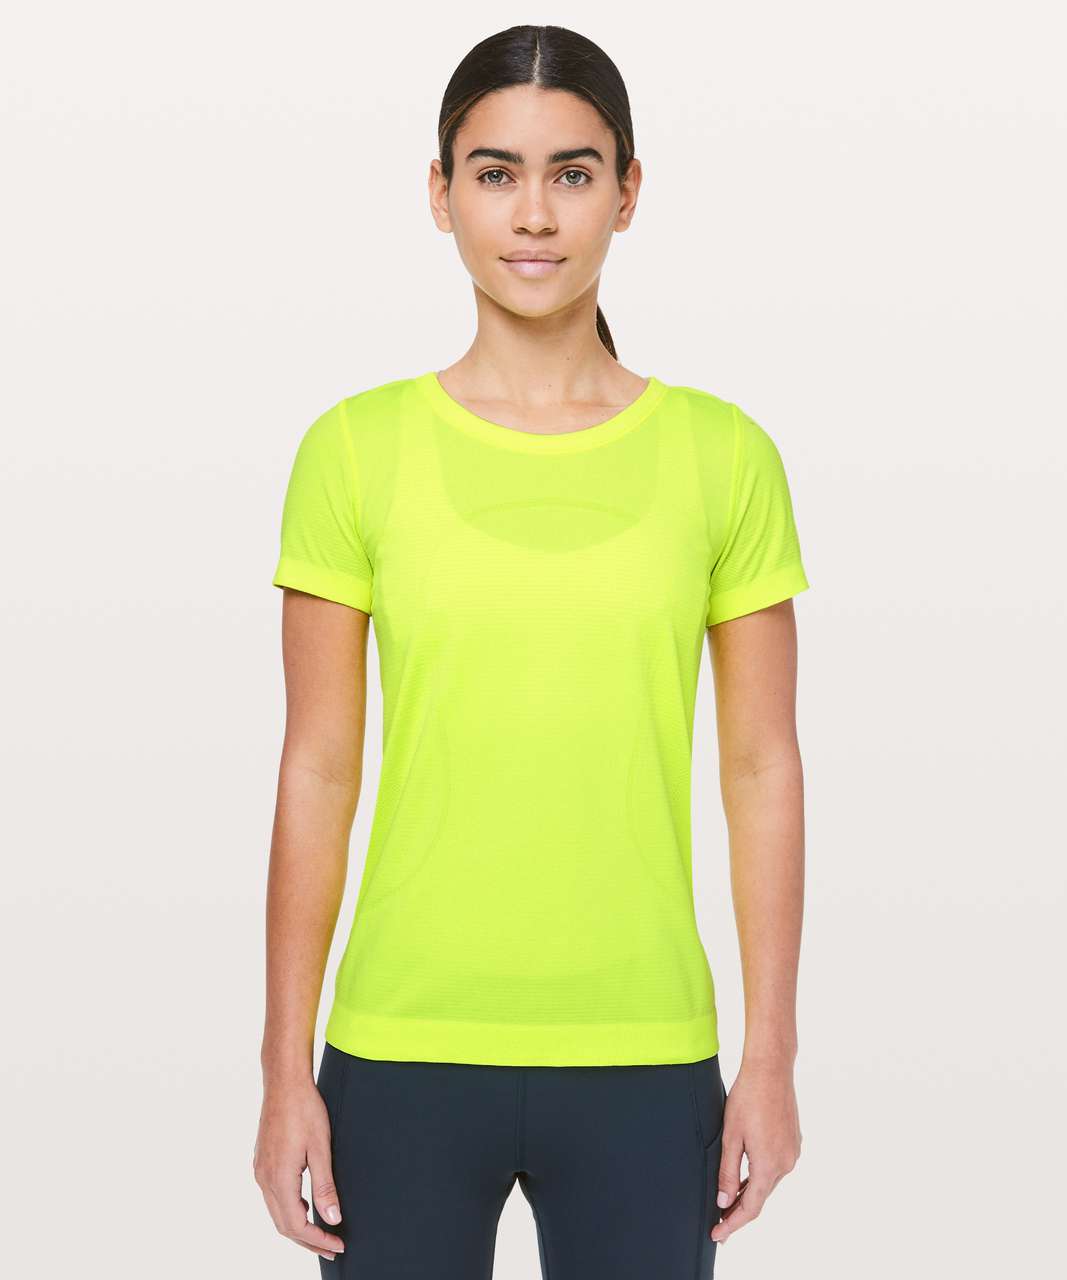 Lululemon Swiftly Tech Short Sleeve (Breeze) *Relaxed Fit - Ray / Ray